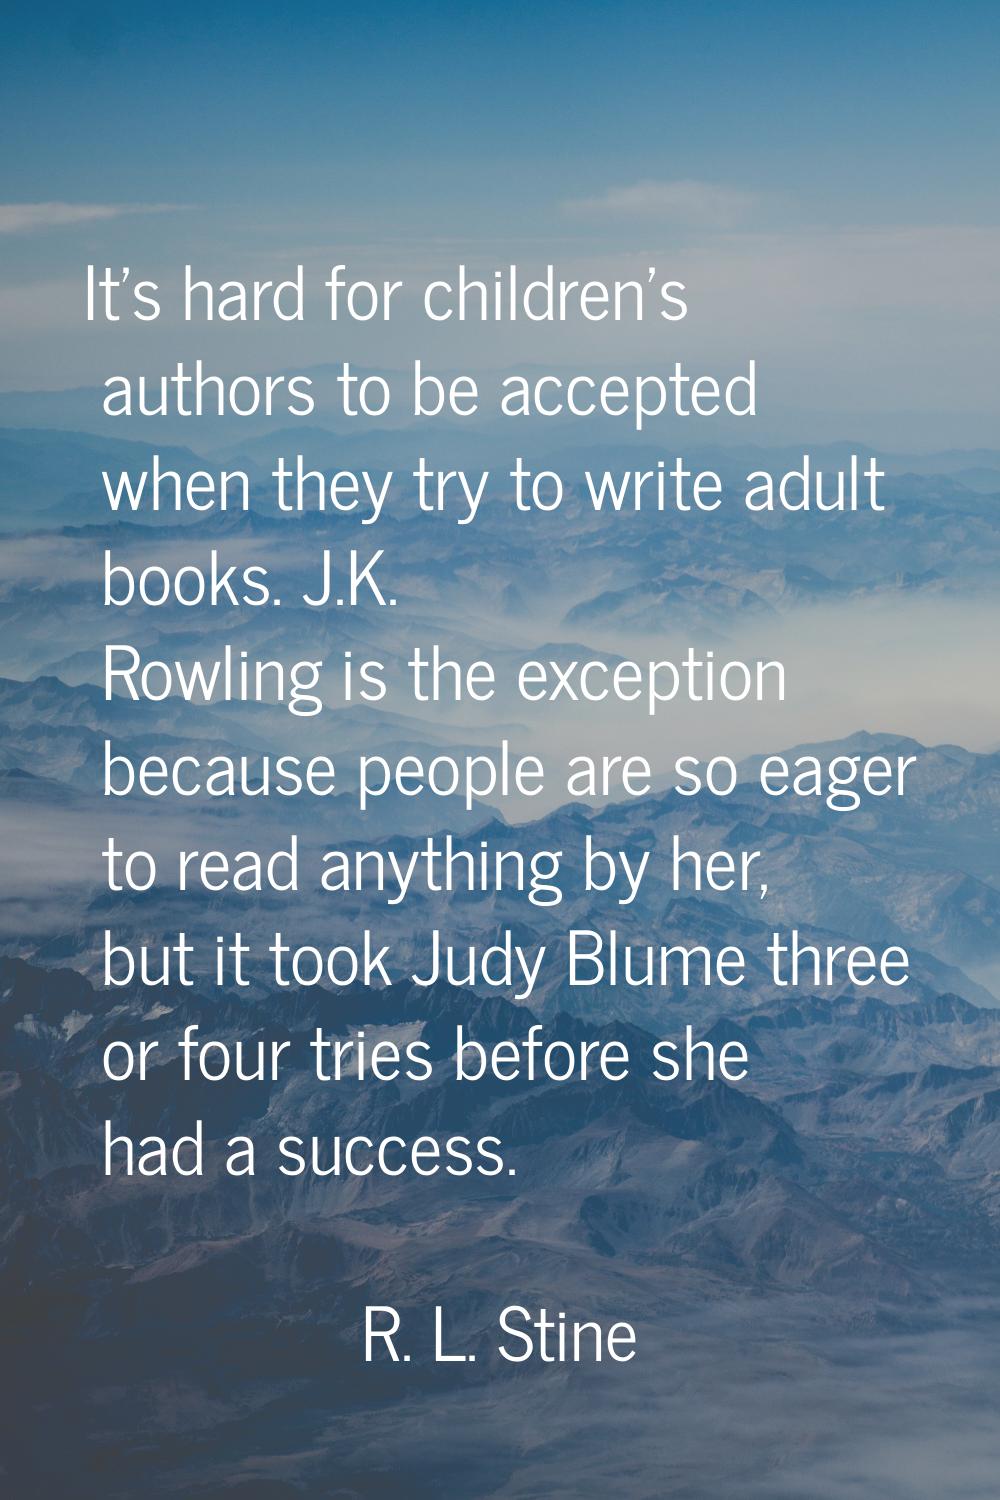 It's hard for children's authors to be accepted when they try to write adult books. J.K. Rowling is